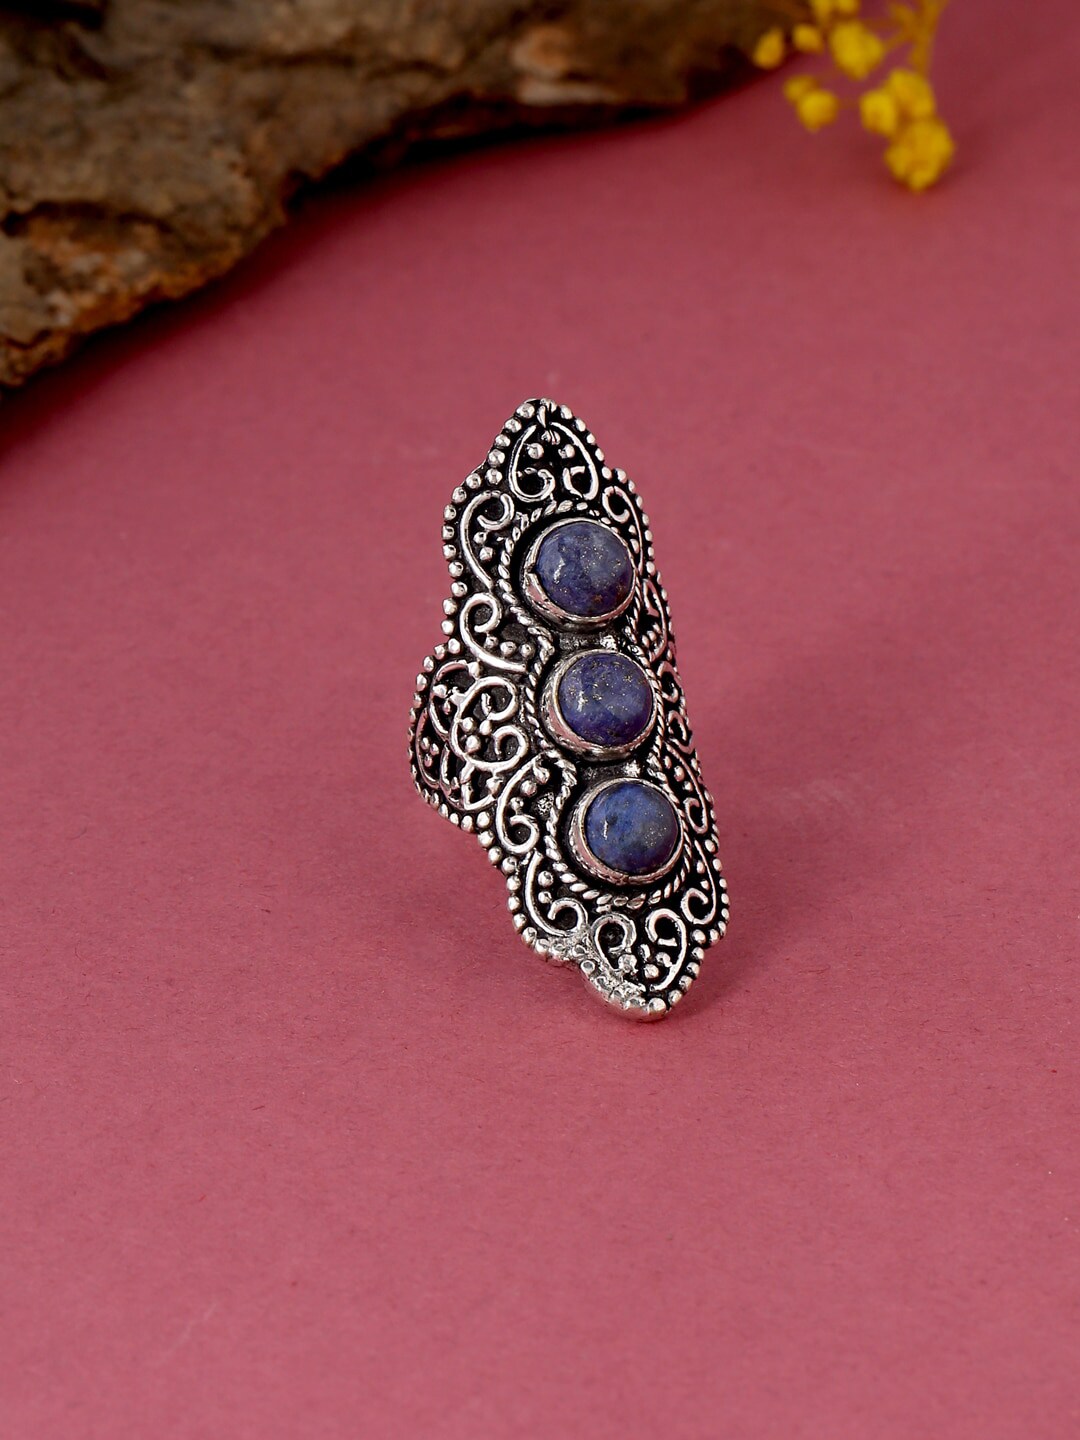 kashwini Silver-Plated Blue Stone-Studded Finger Ring Price in India